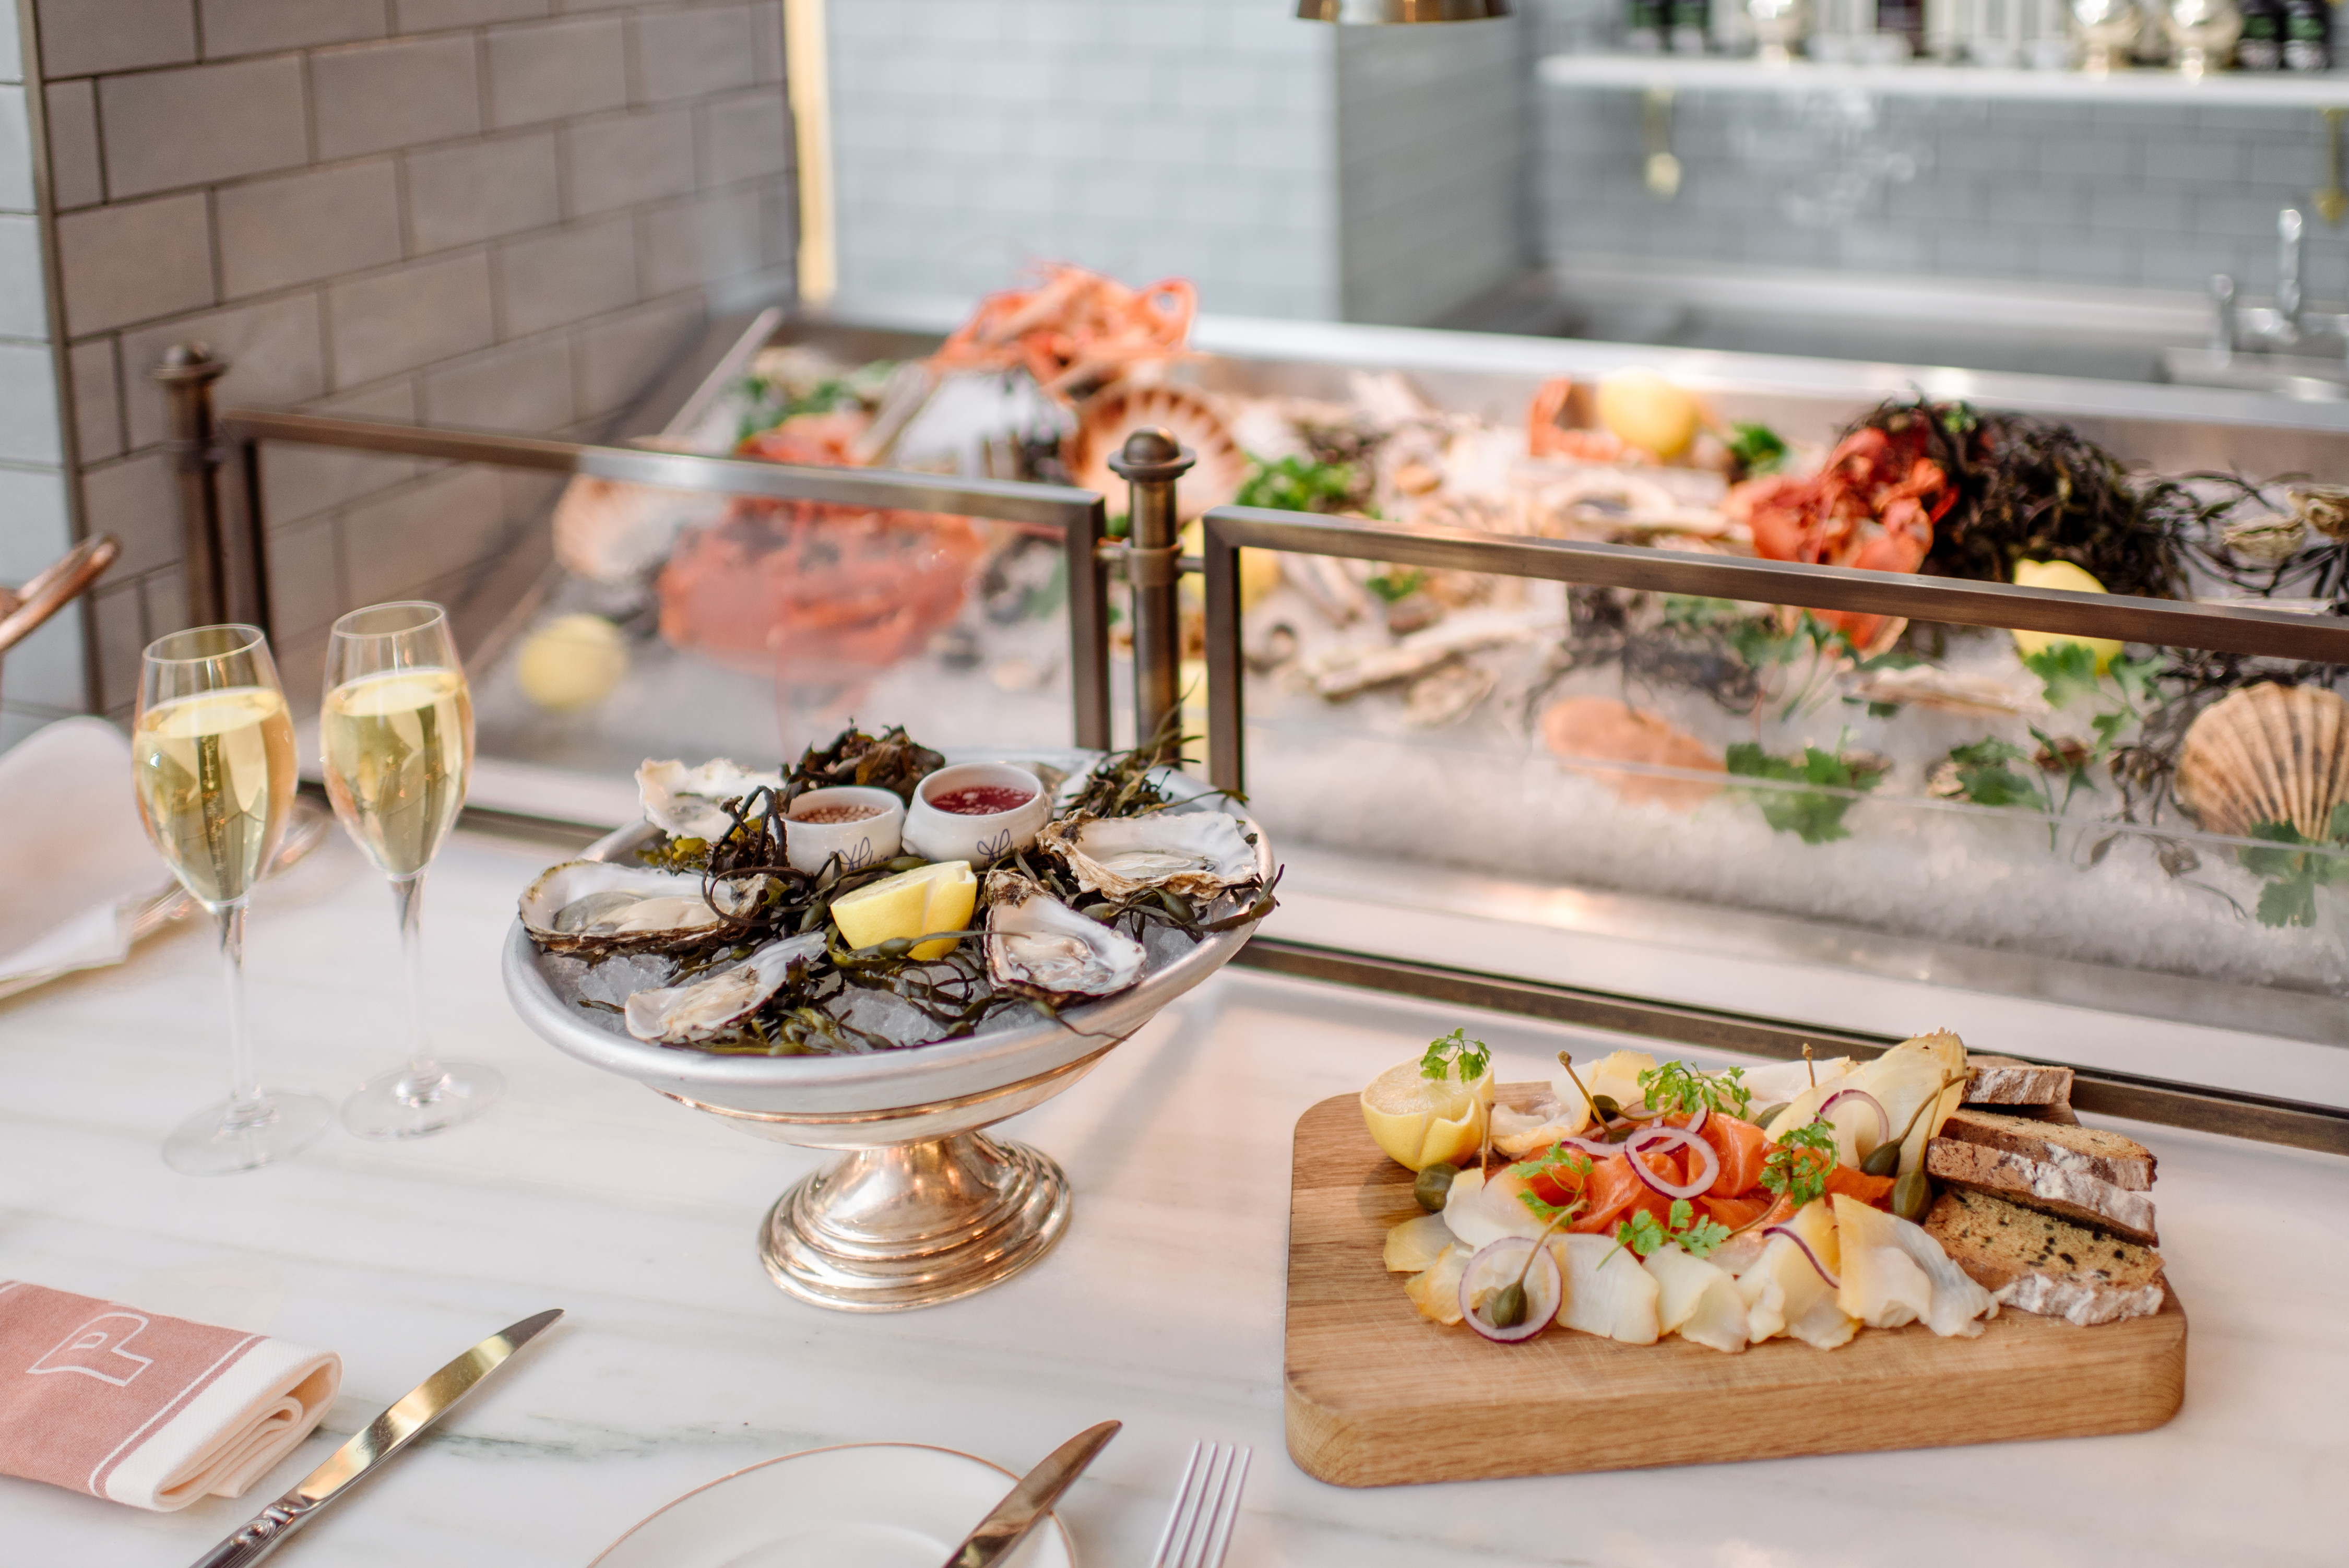 The Raw Bar at Brasserie Prince by Alain Roux